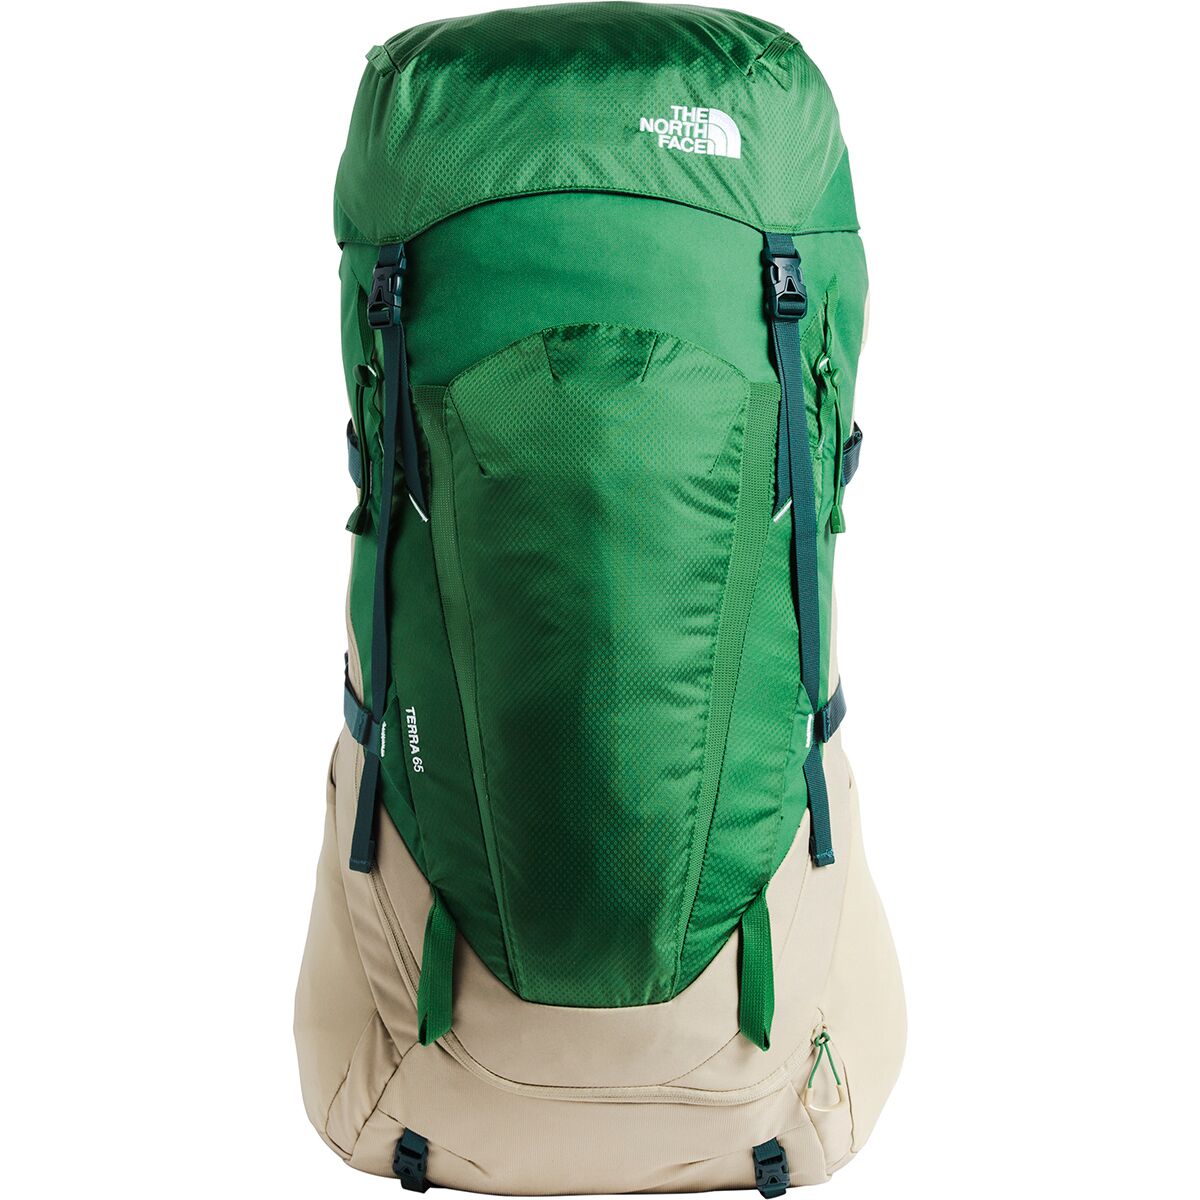 The North Face Terra 65L Backpack - Hike & Camp